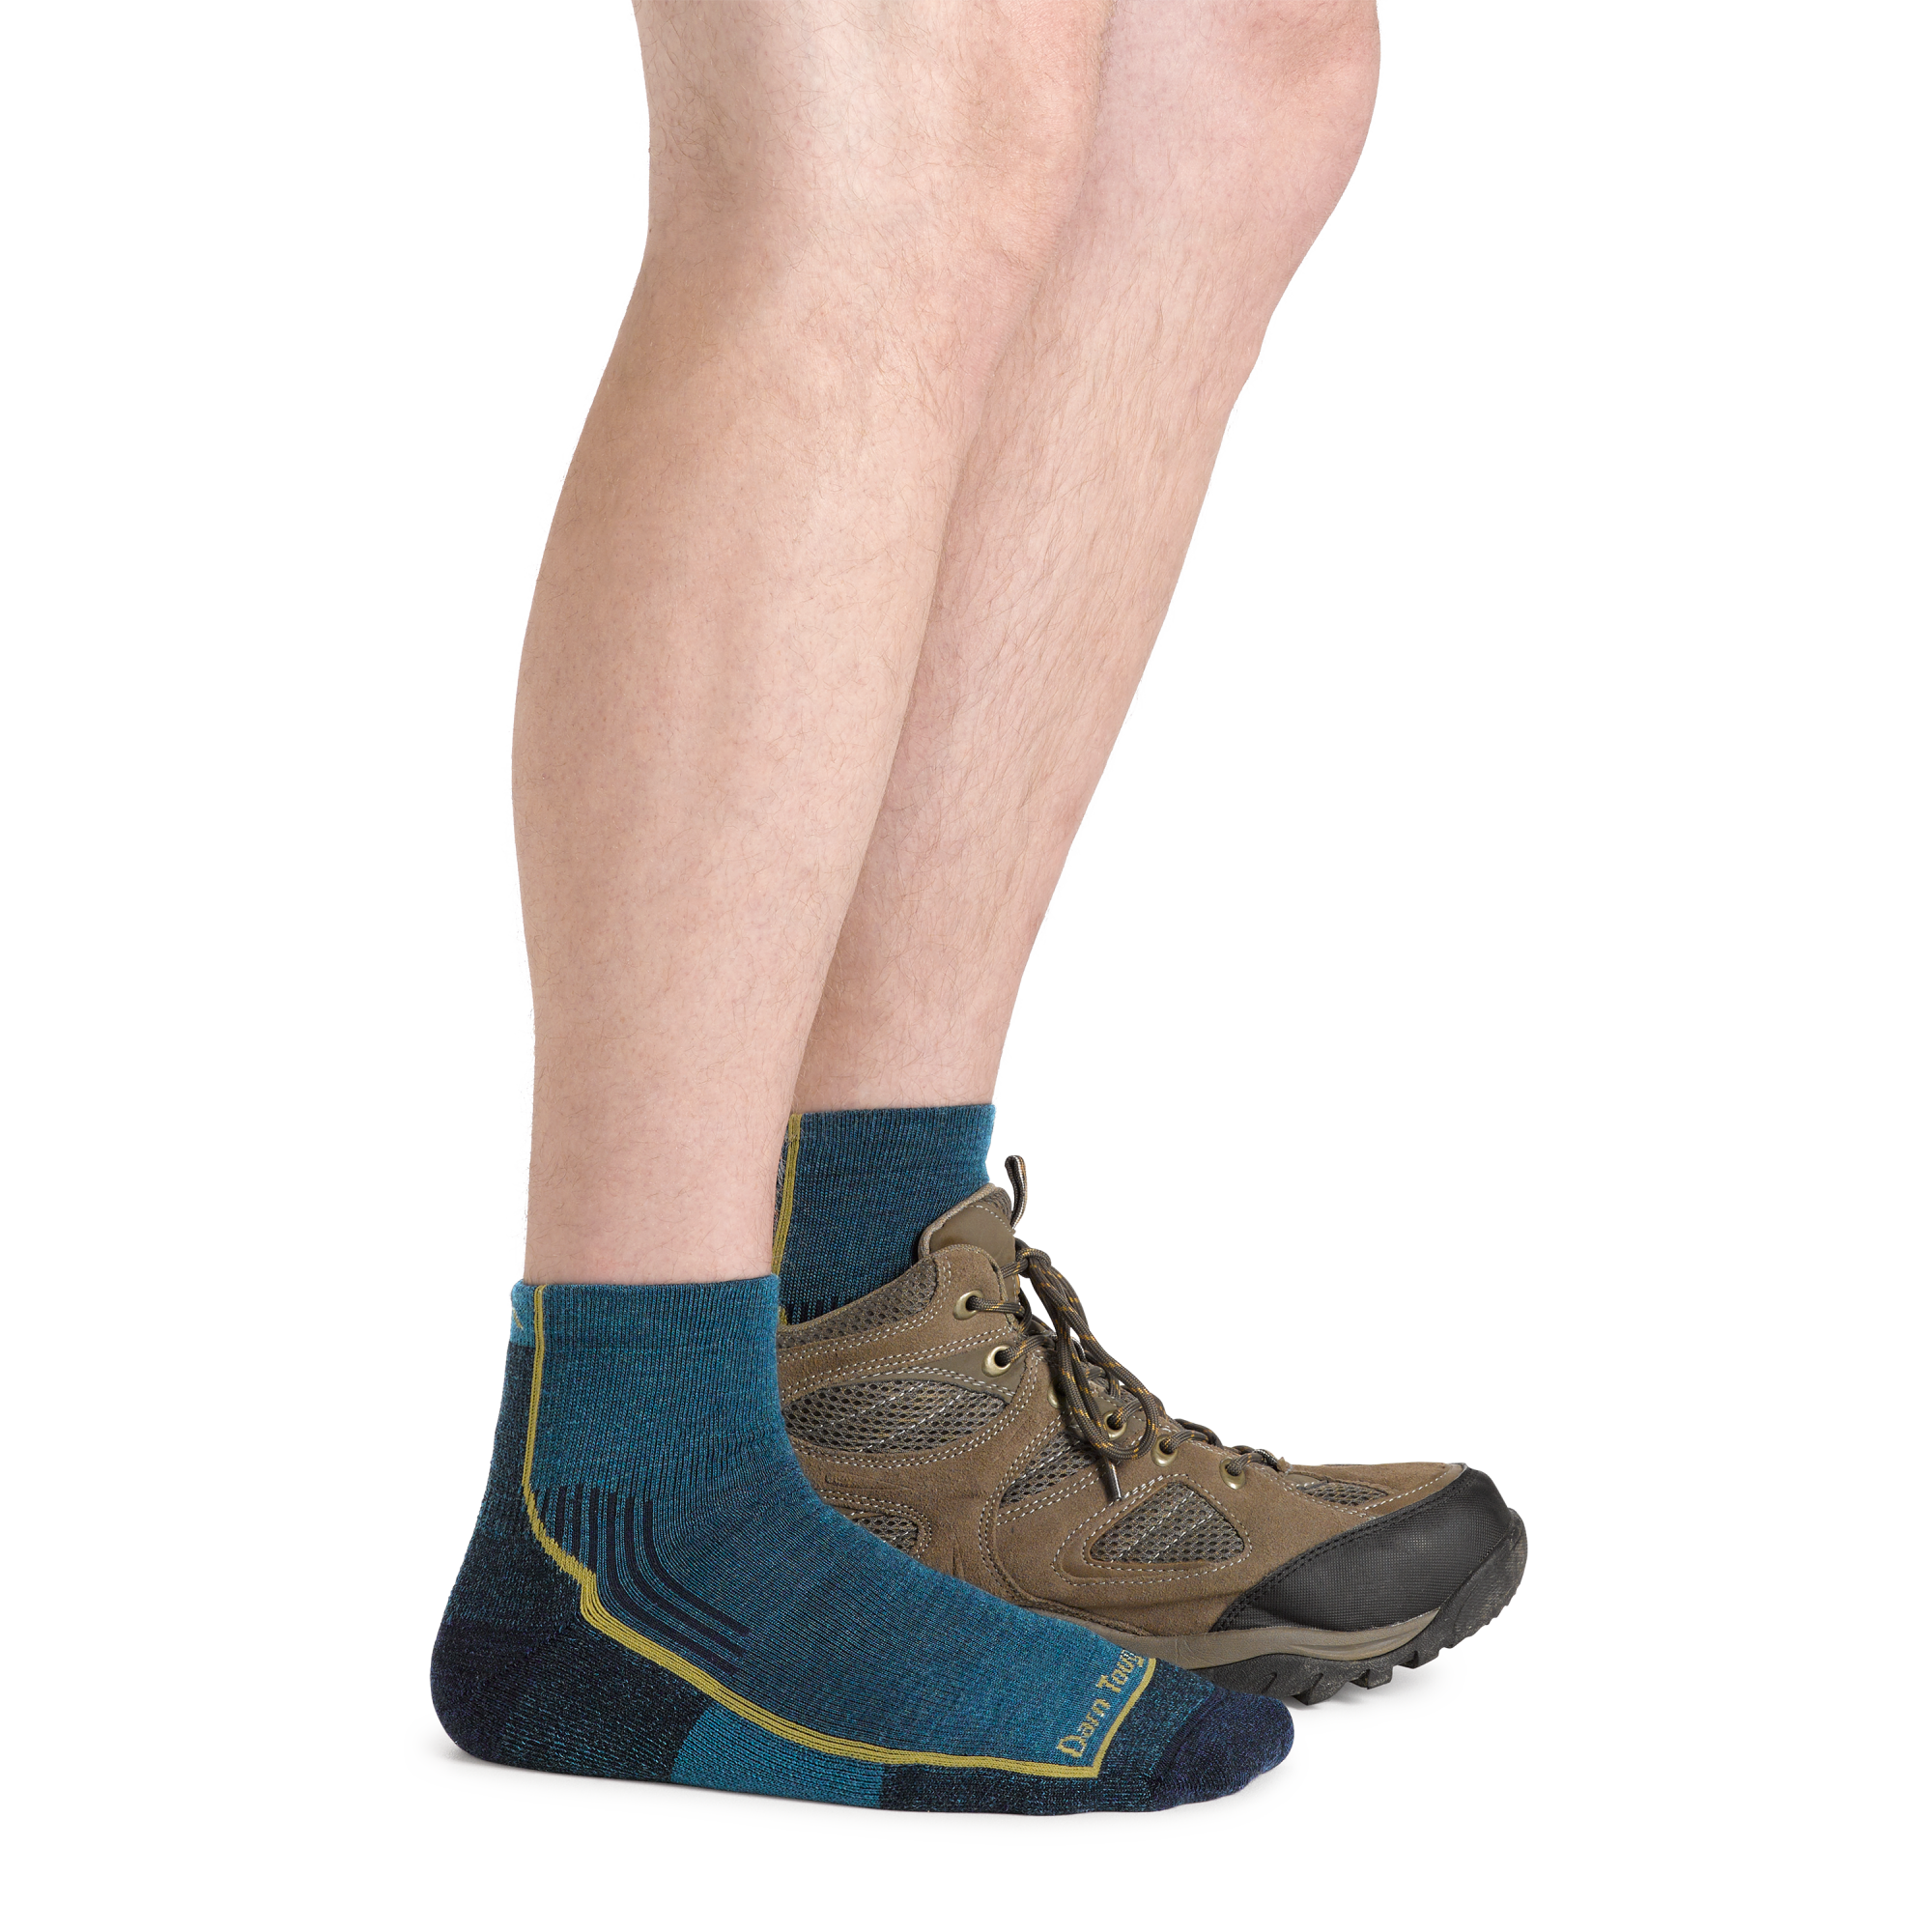 Model wearing Men's Hiker Quarter Midweight Hiking Socks in dark teal and a hiking boot on one foot